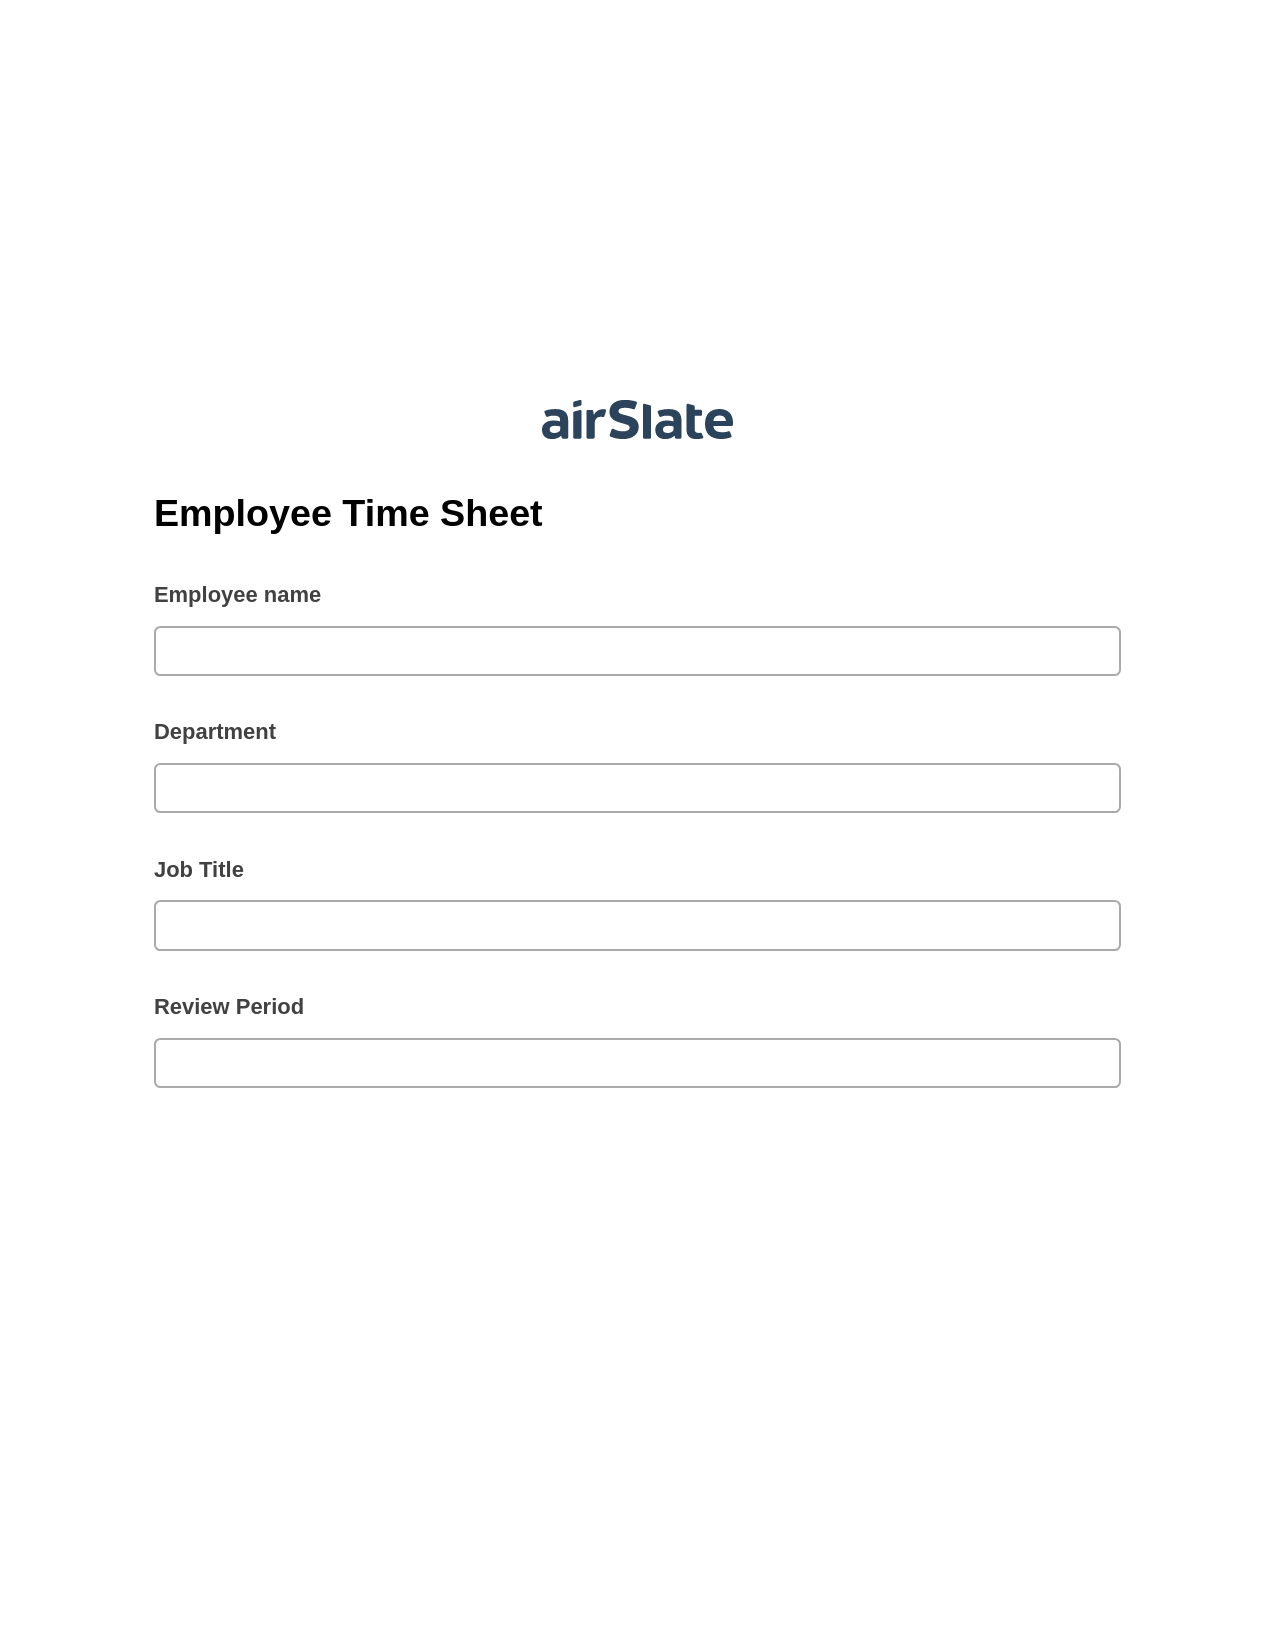 Multirole Employee Time Sheet Pre-fill from MS Dynamics 365 Records, Create Salesforce Records Bot, Export to Excel 365 Bot